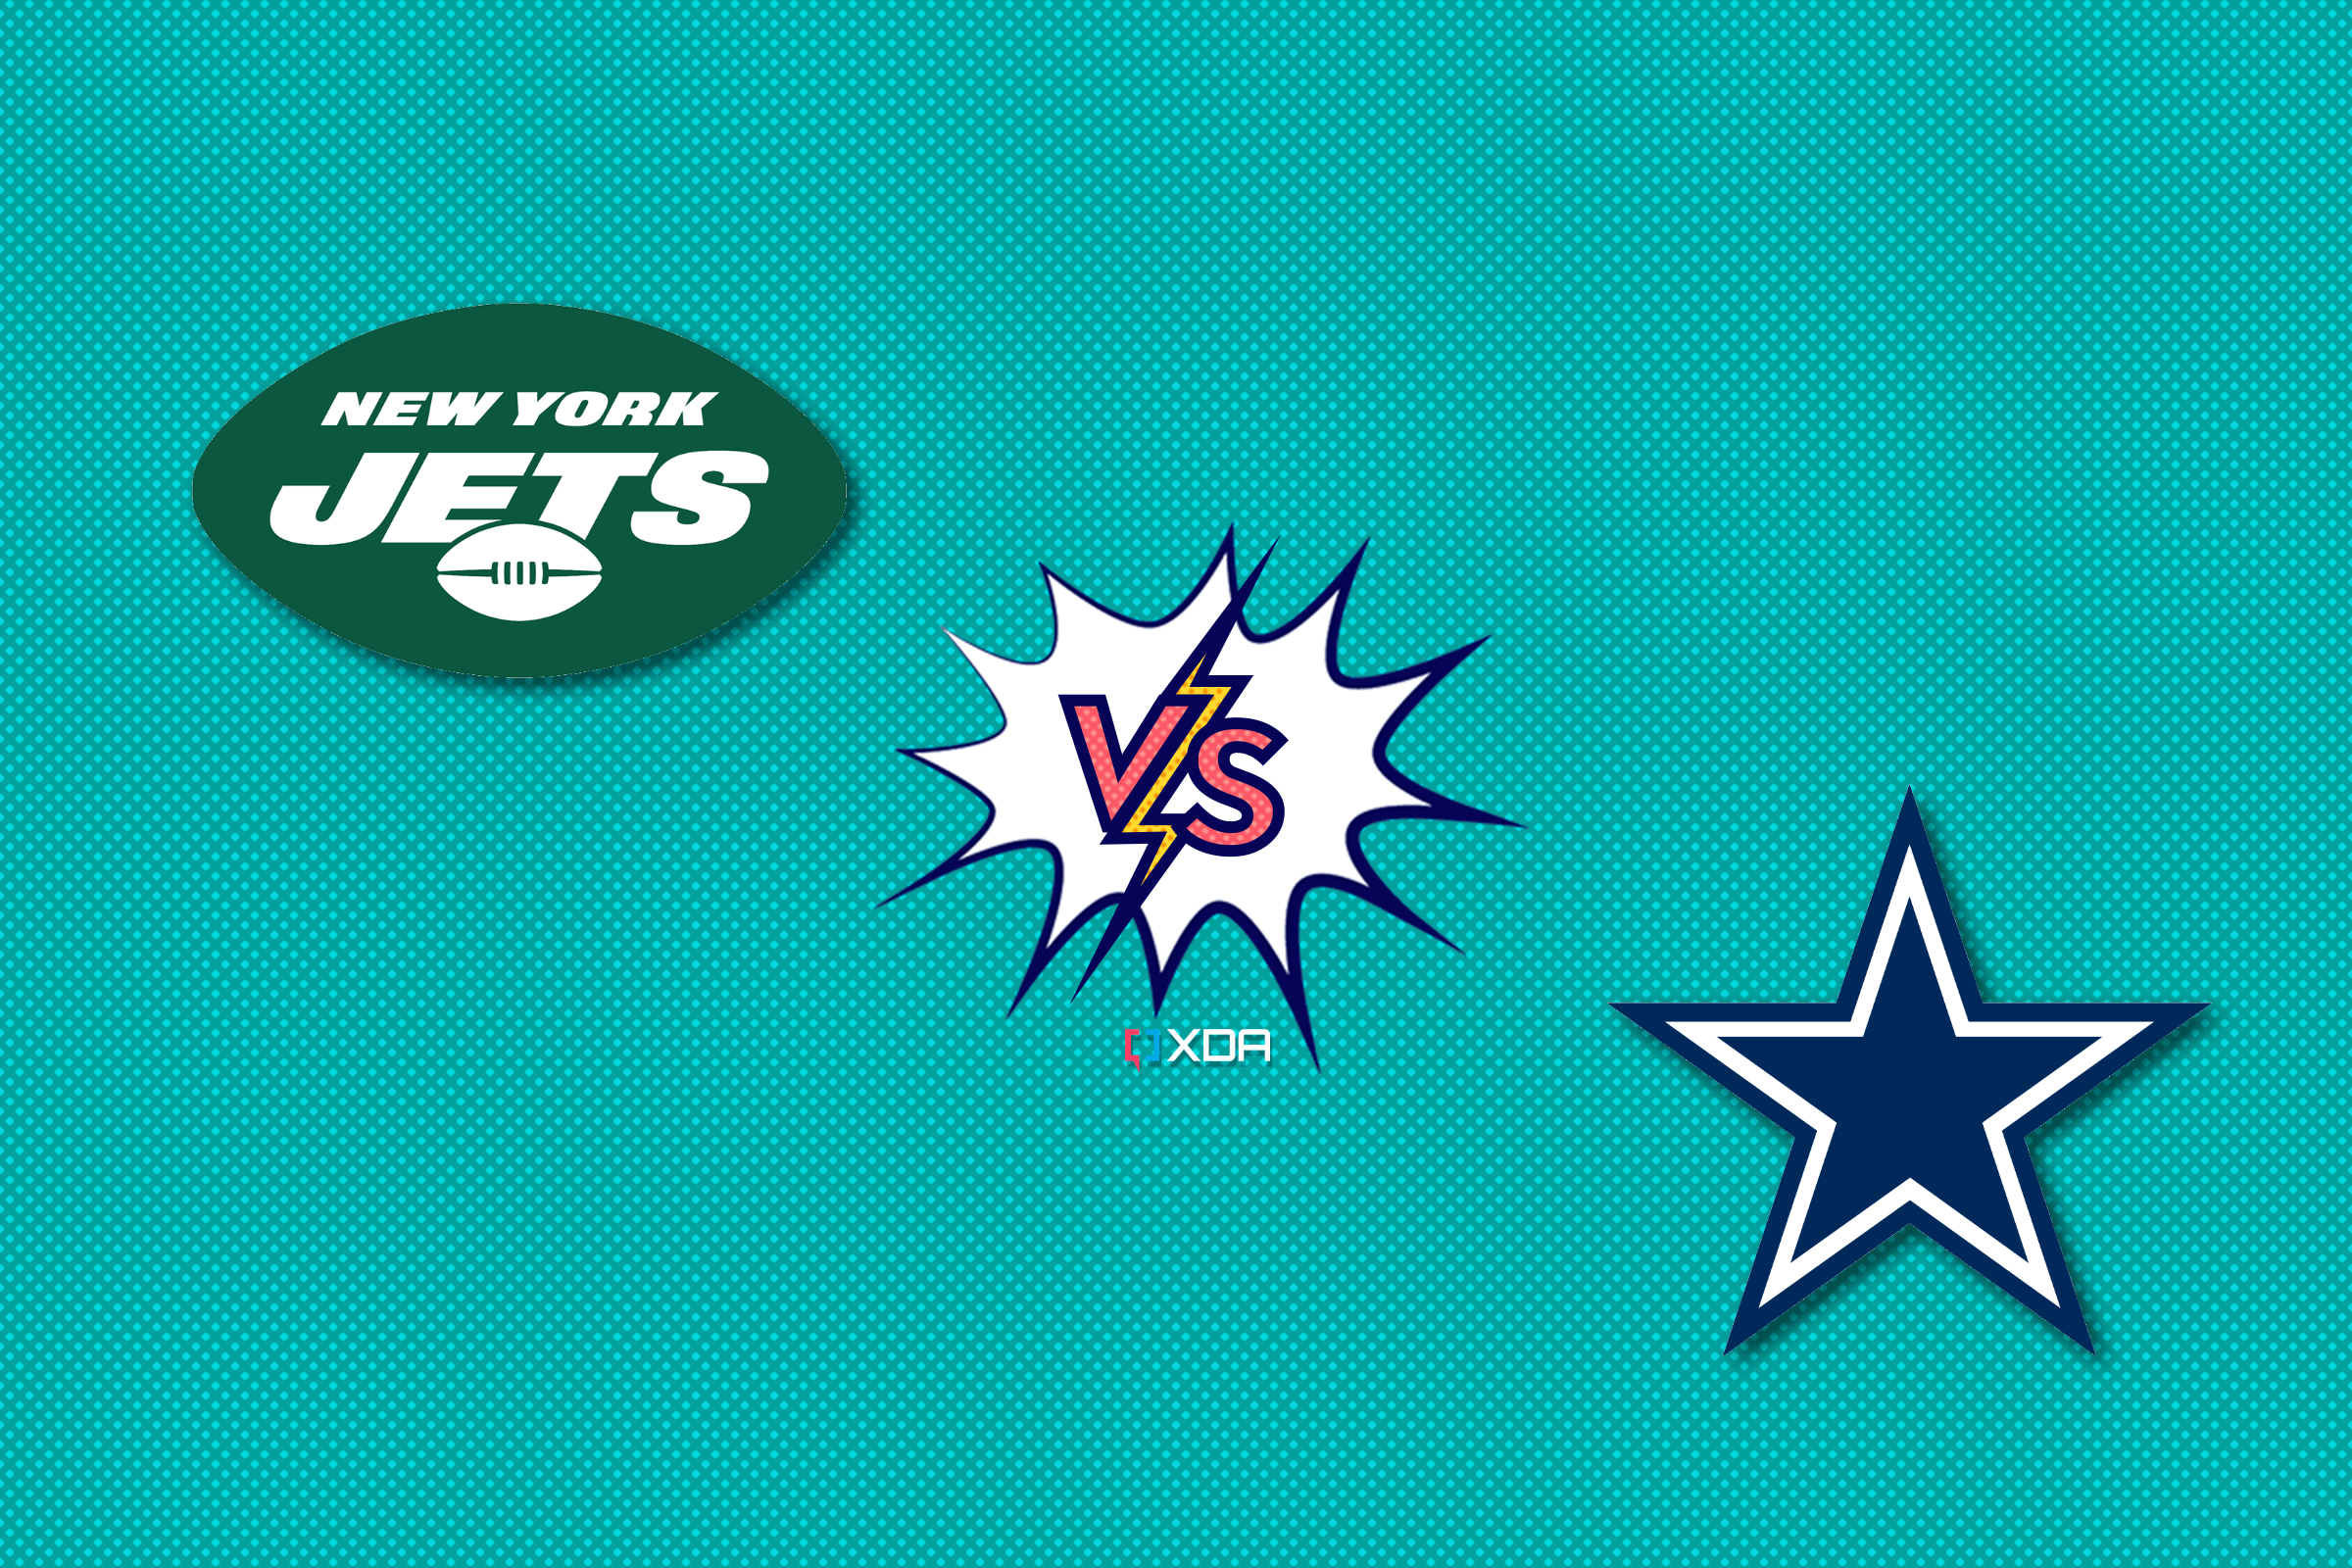 How to watch New York Jets vs Dallas Cowboys live from anywhere